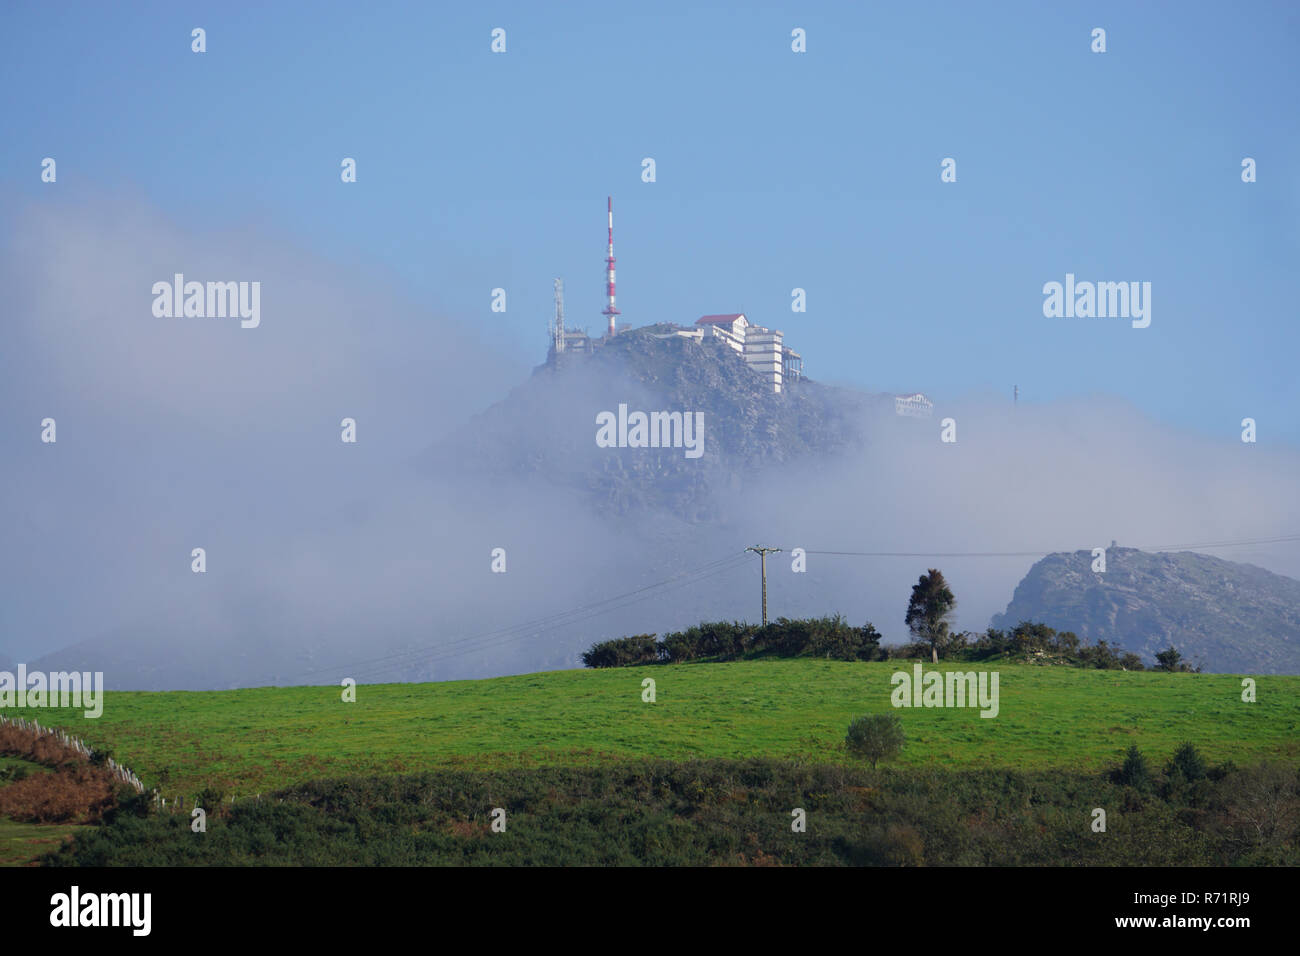 Fog lifting on the high peak of Ibardin, Spain on a clear summer day Stock Photo